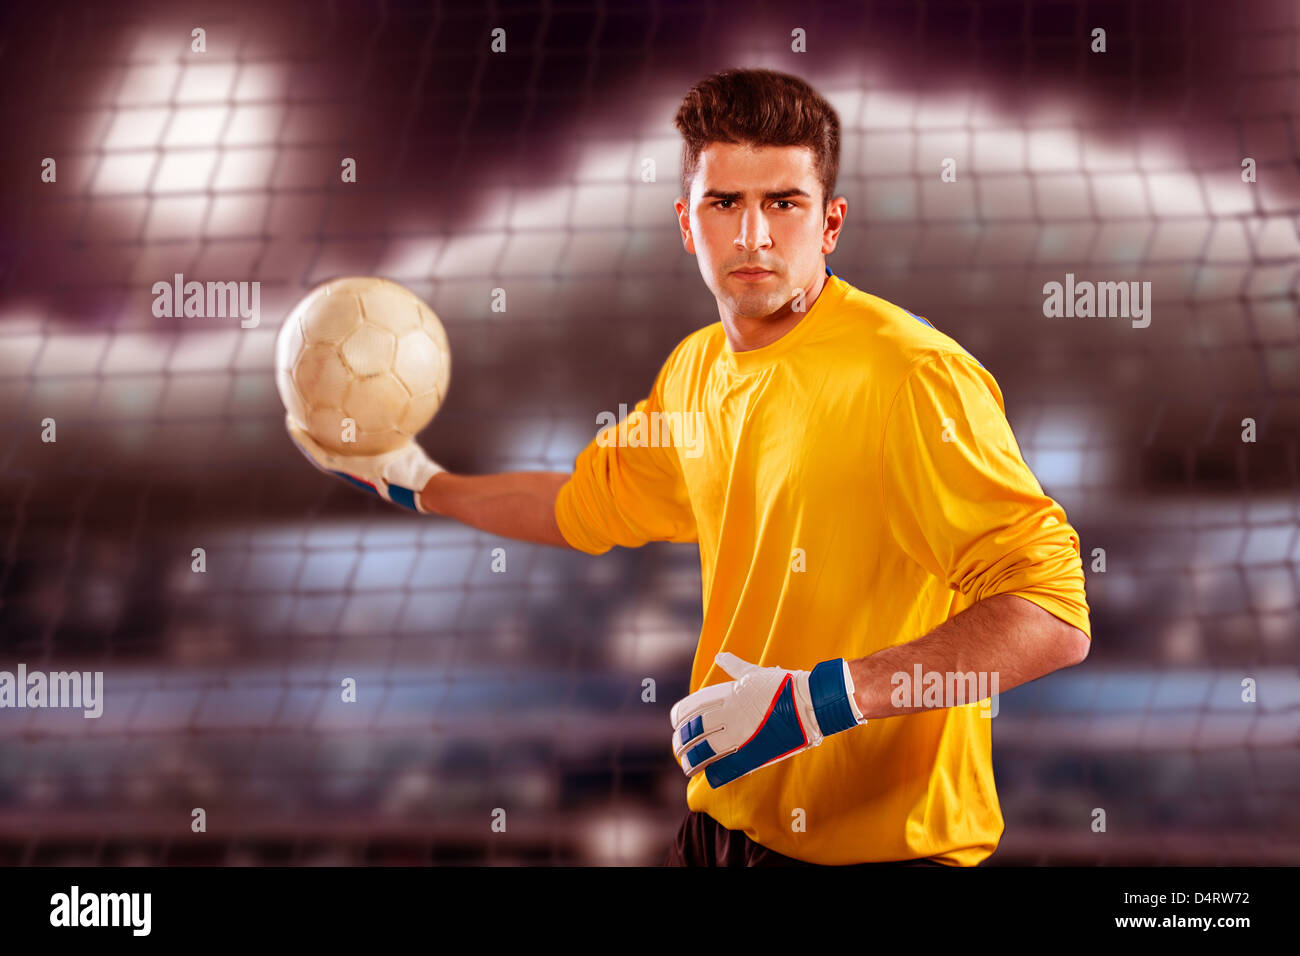 soccer or football goalkeeper on the field Stock Photo